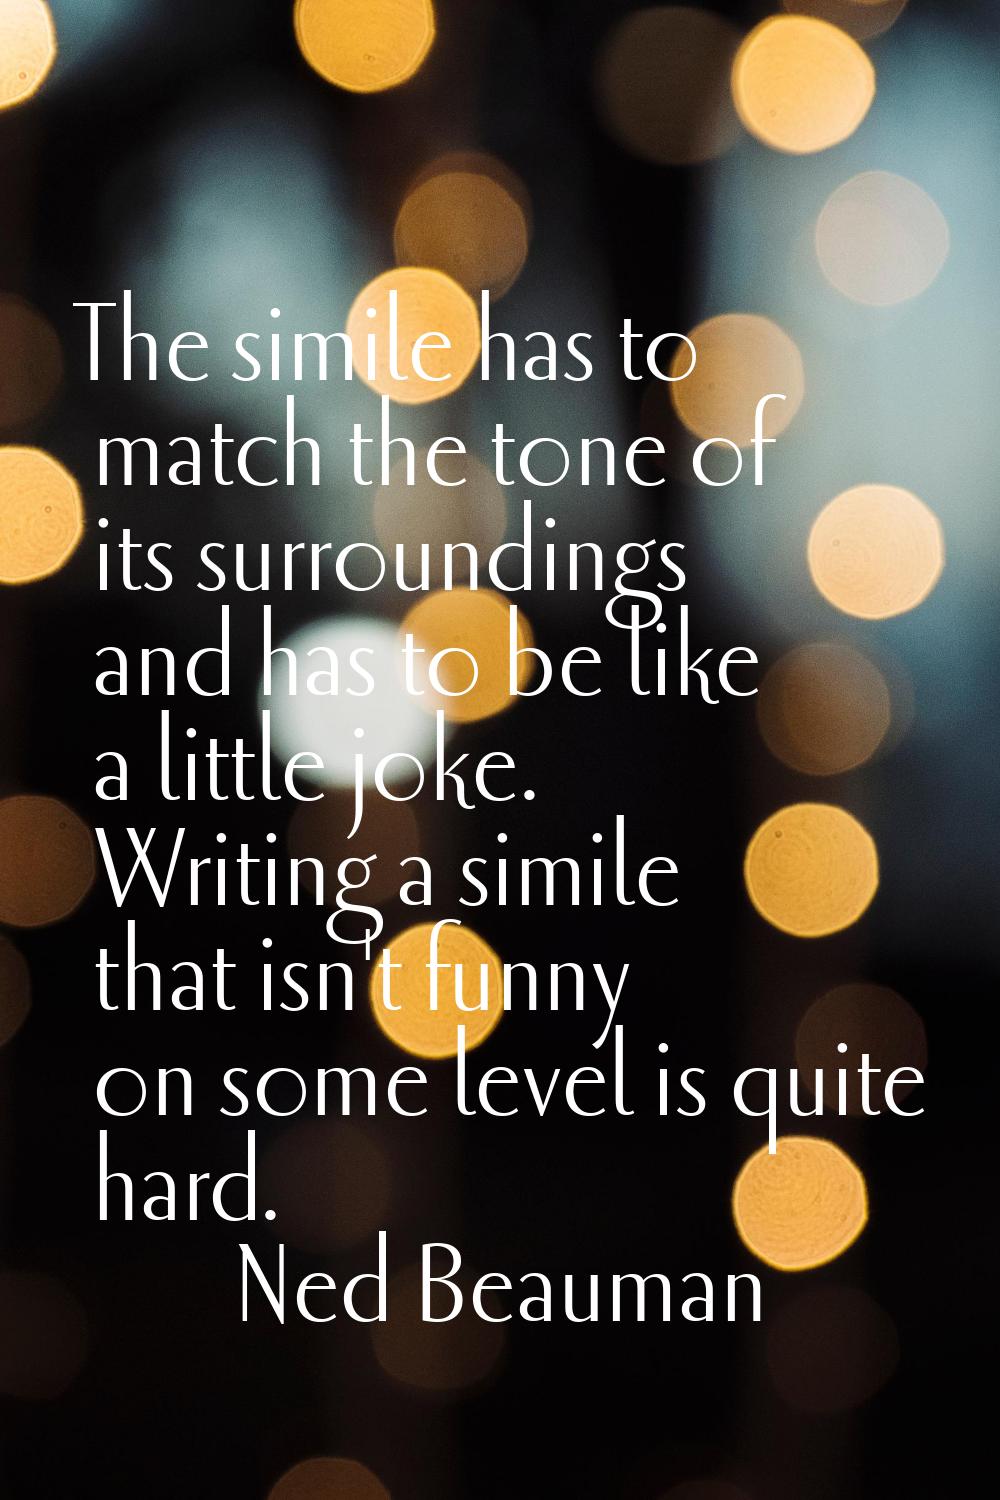 The simile has to match the tone of its surroundings and has to be like a little joke. Writing a si